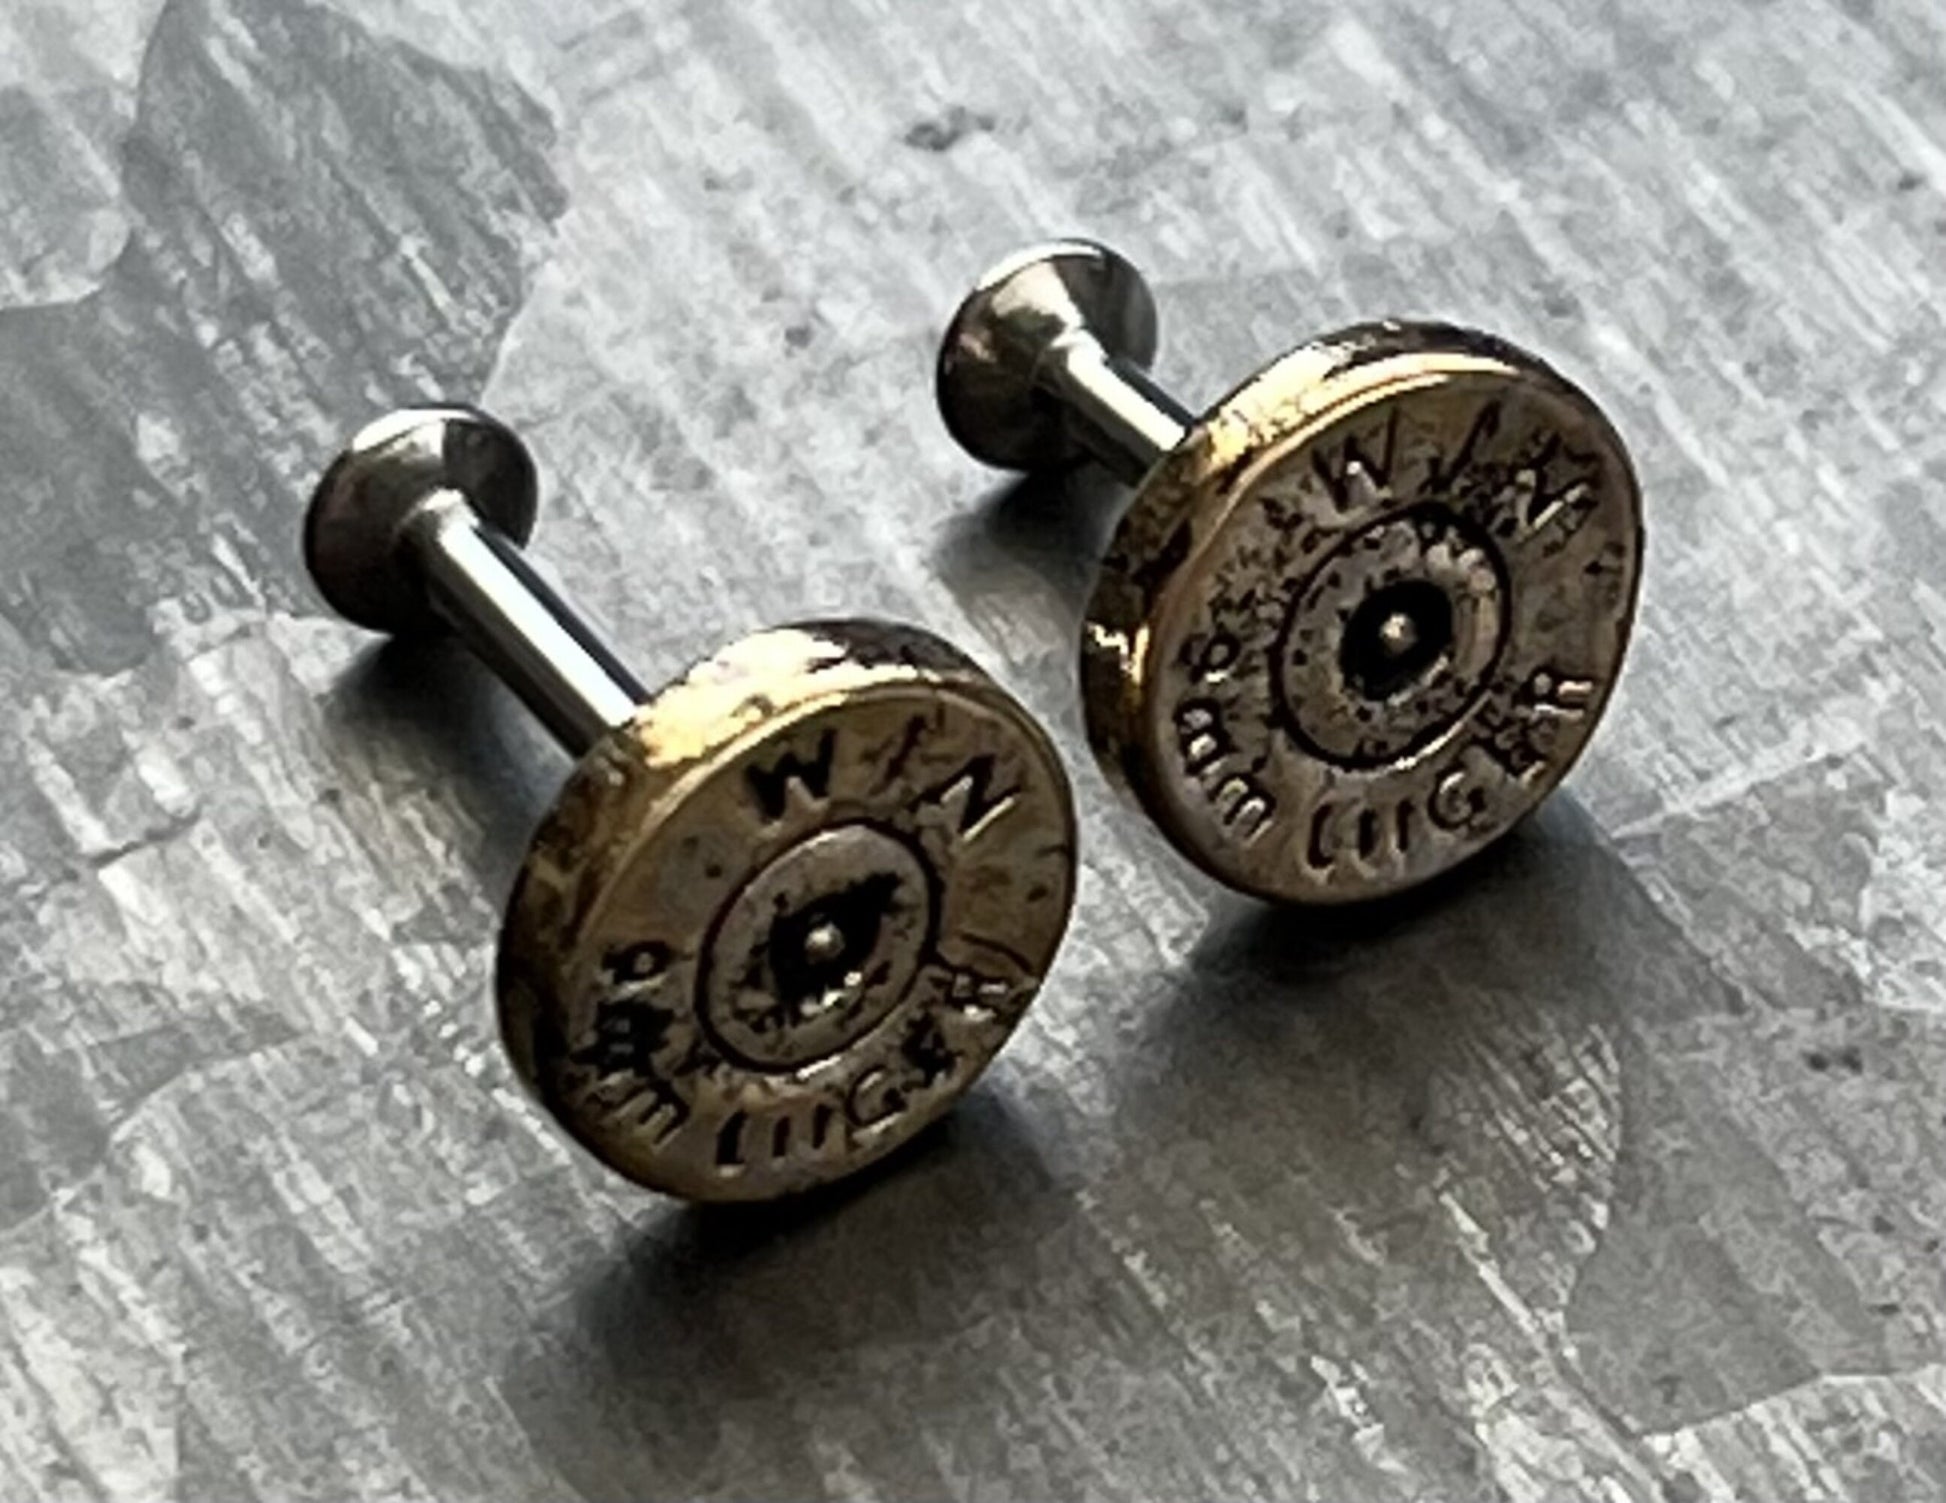 1 Piece Unique 9mm Bullet Internally Threaded Labret Stud - 16g - Post Length 6mm or 8mm Available!